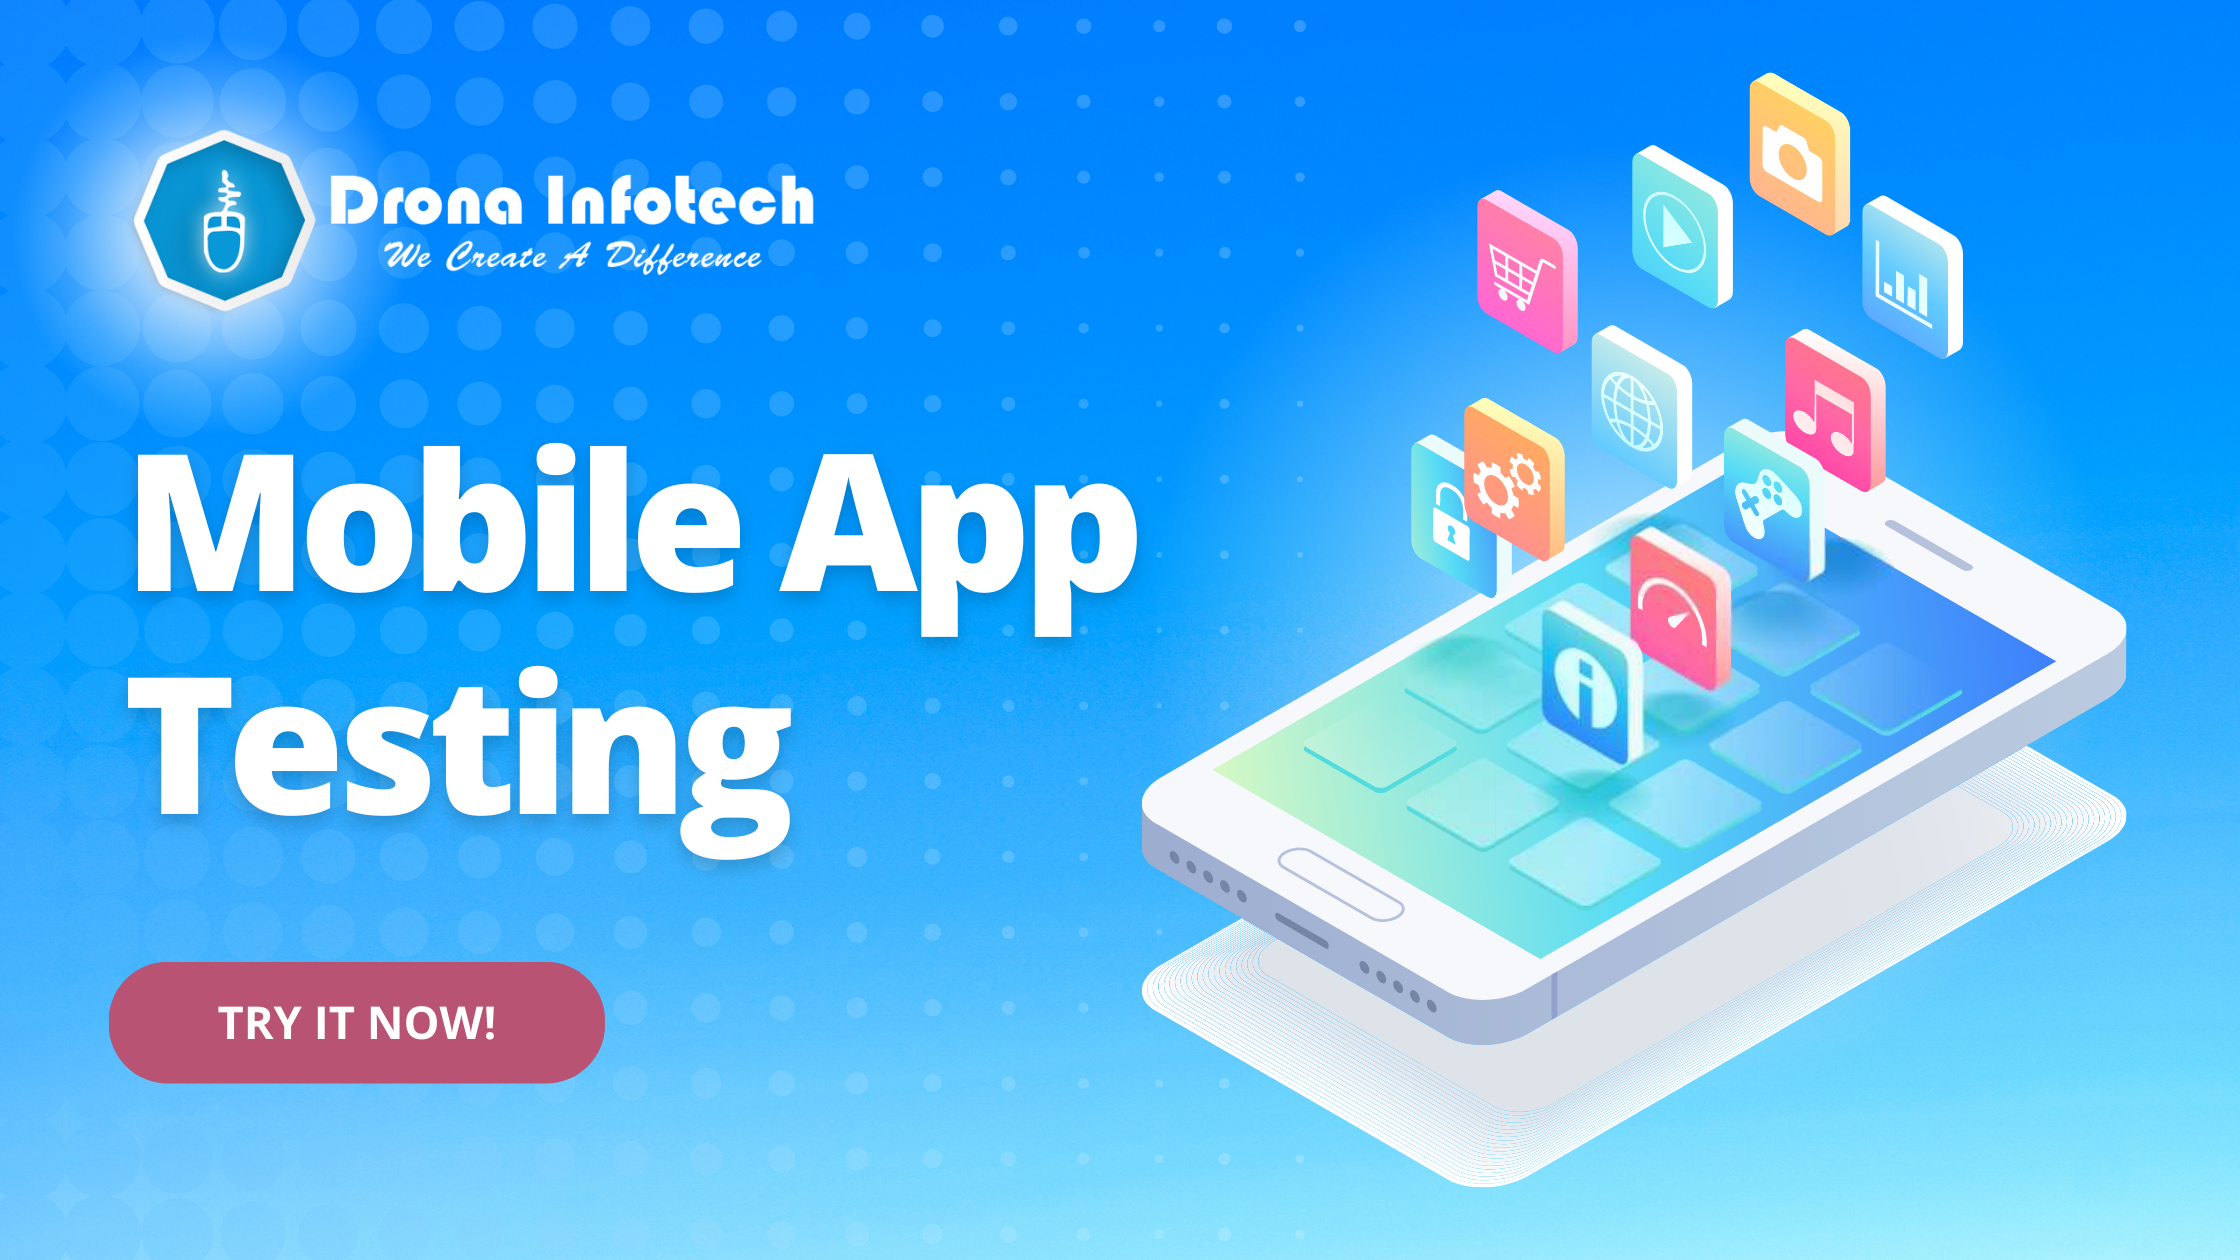 Greatest Mobile App testing tools to improve performance